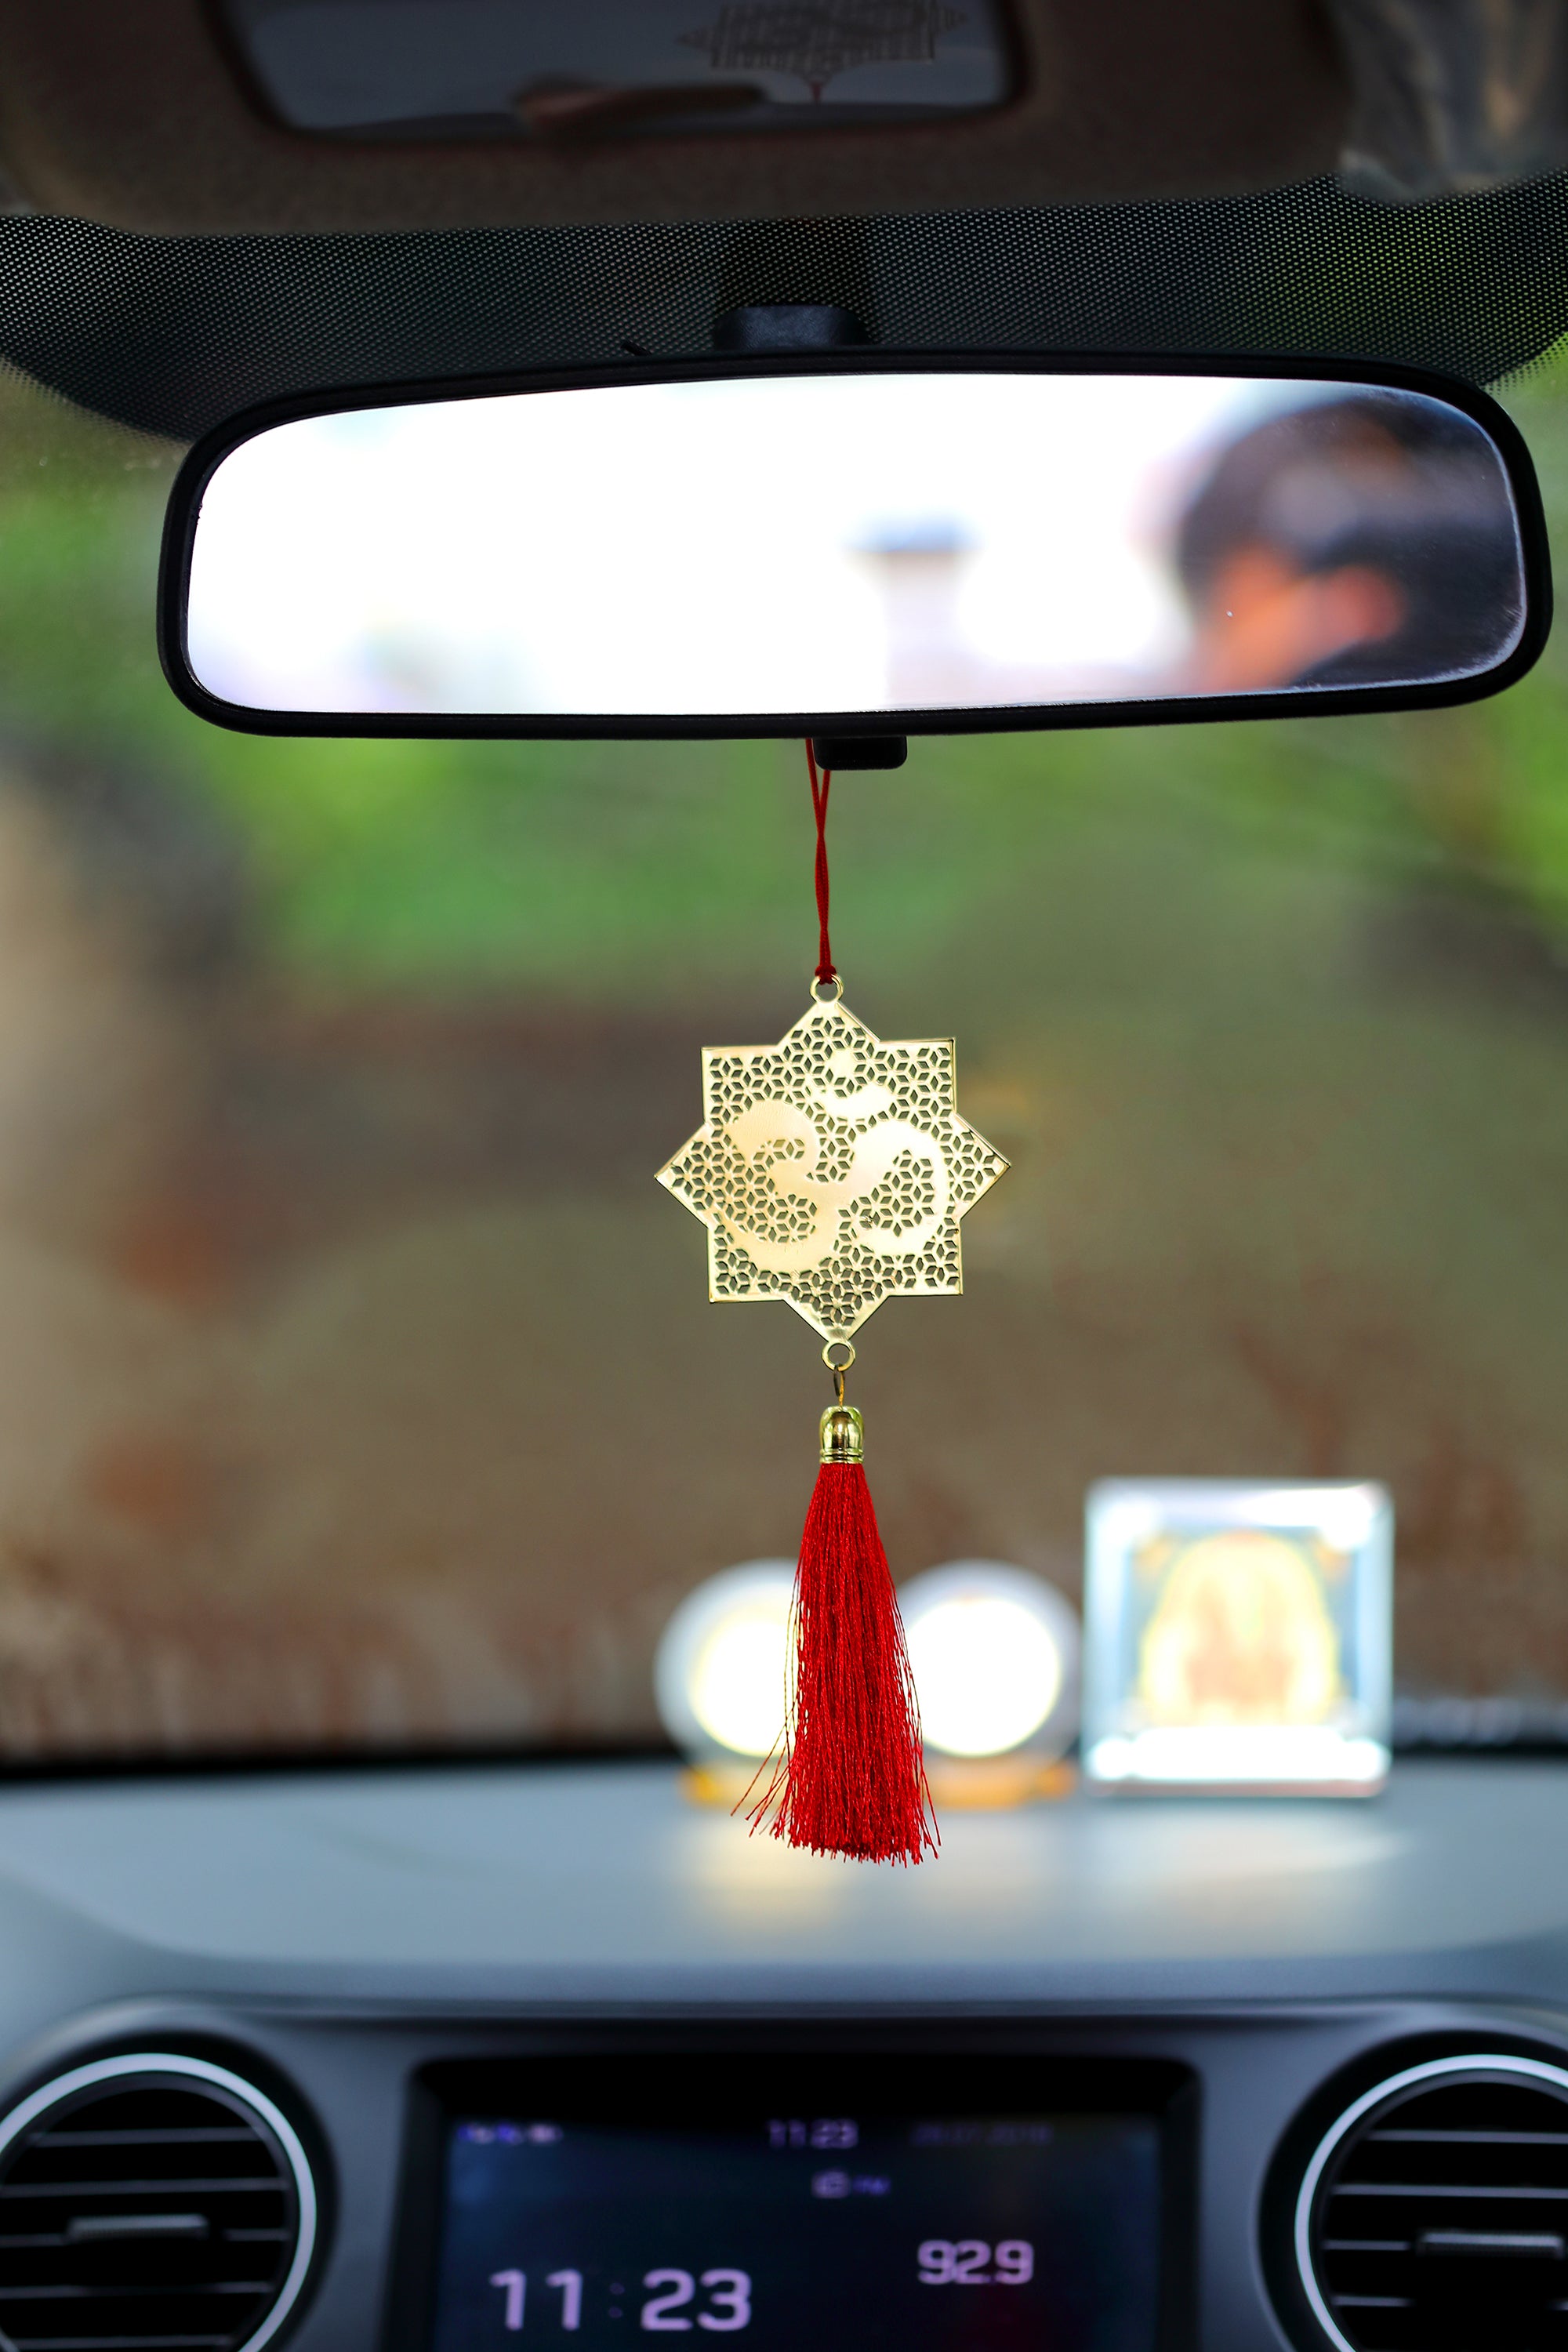 Hindu Om Symbol Hanging Accessories for Car rear view mirror Decor in Brass - Jaali Red